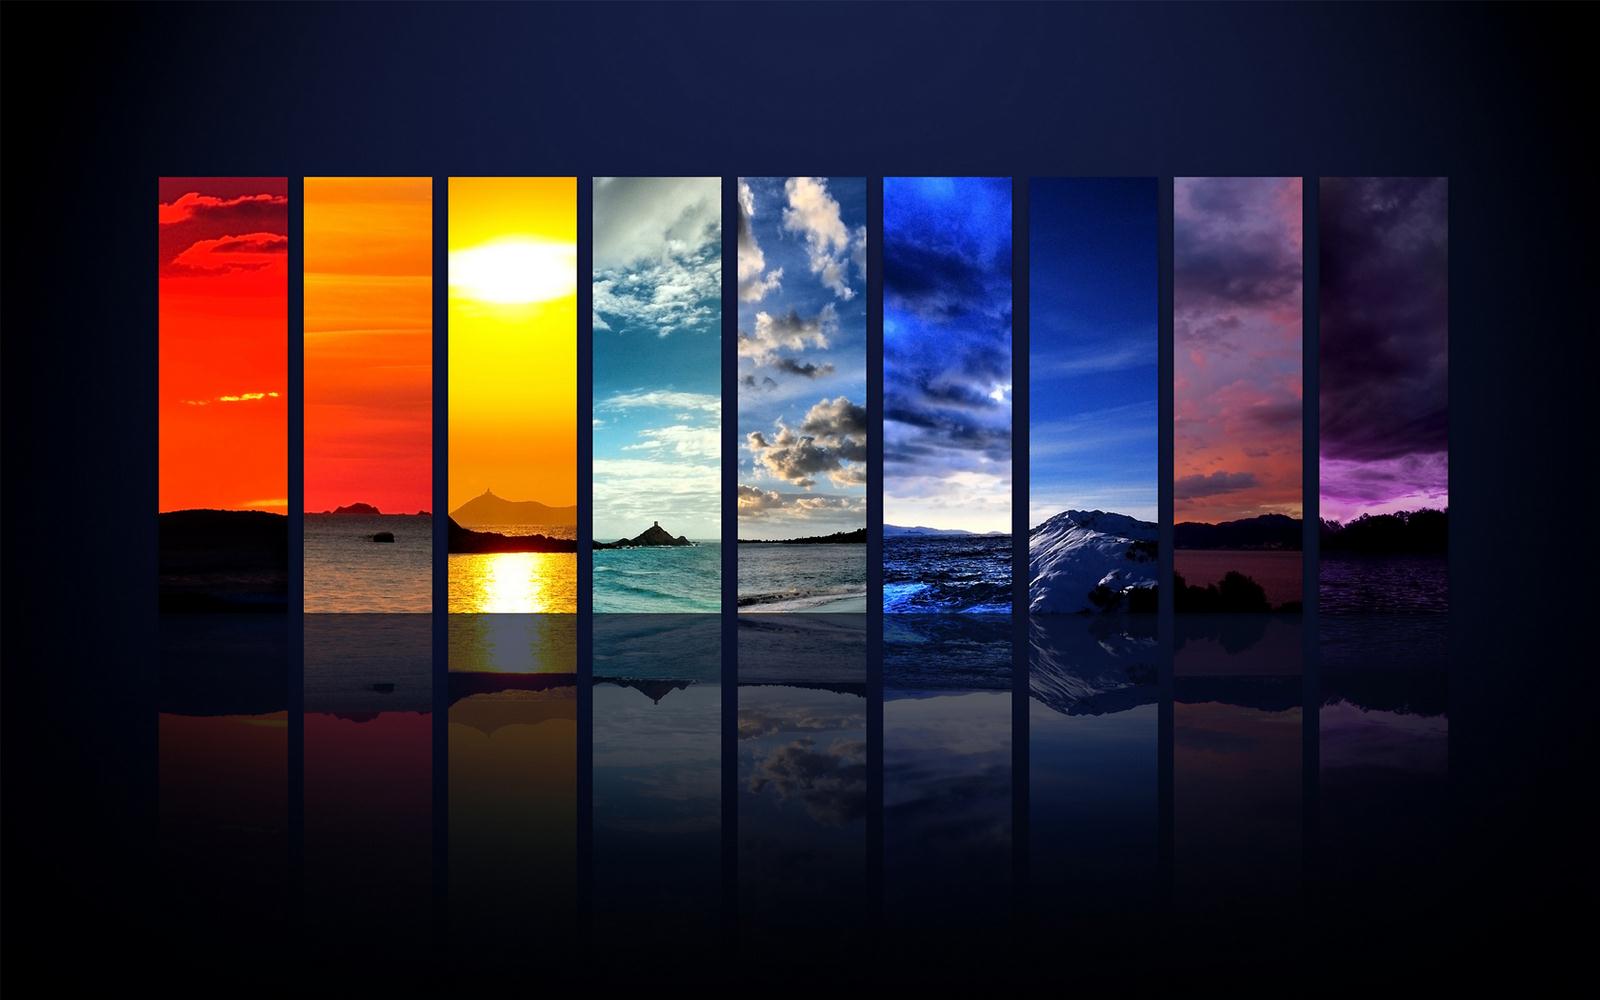 Free Windows Wallpapers Hd 1600x1000PX ~ Wallpapers Windows 8 for 7